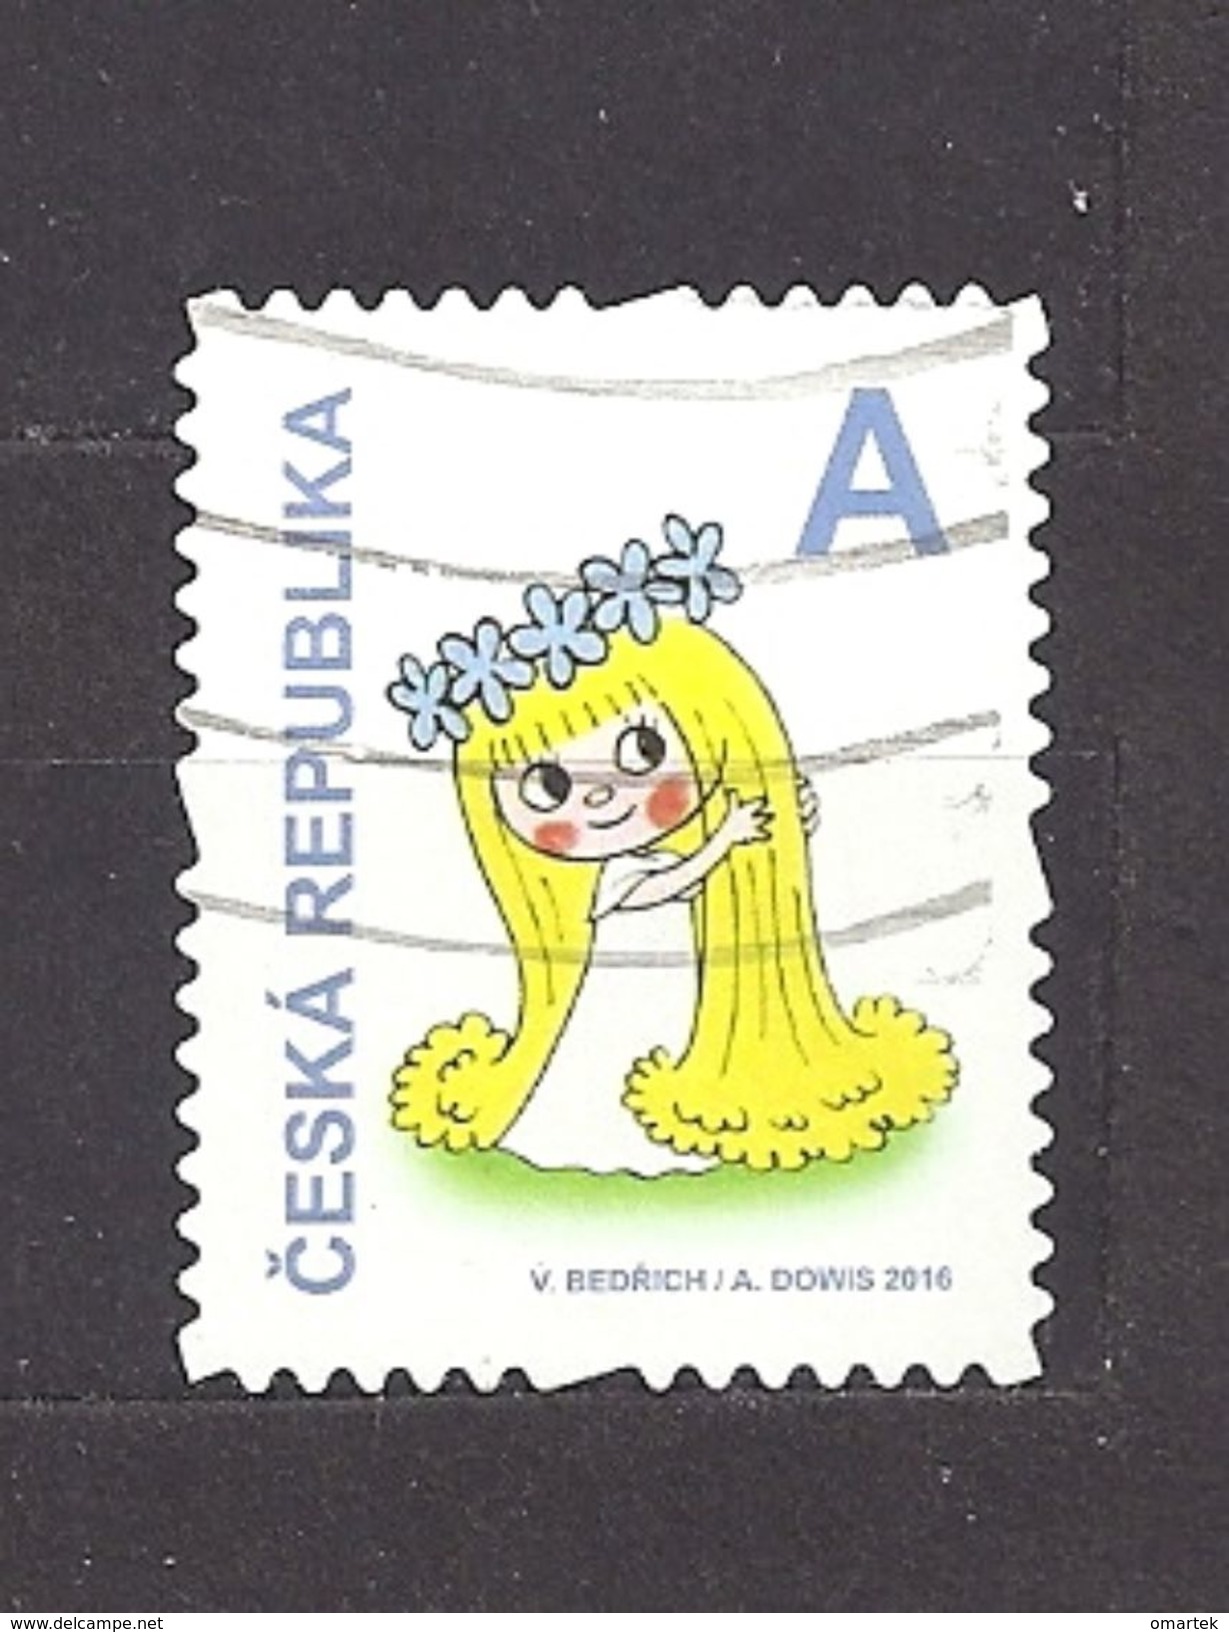 Czech Republic  Tschechische Republik  2016 ⊙ Mi 886 Pof 888 Fairy Amalka - Stamp From Booklet.  Fee Amalka  C11 - Used Stamps